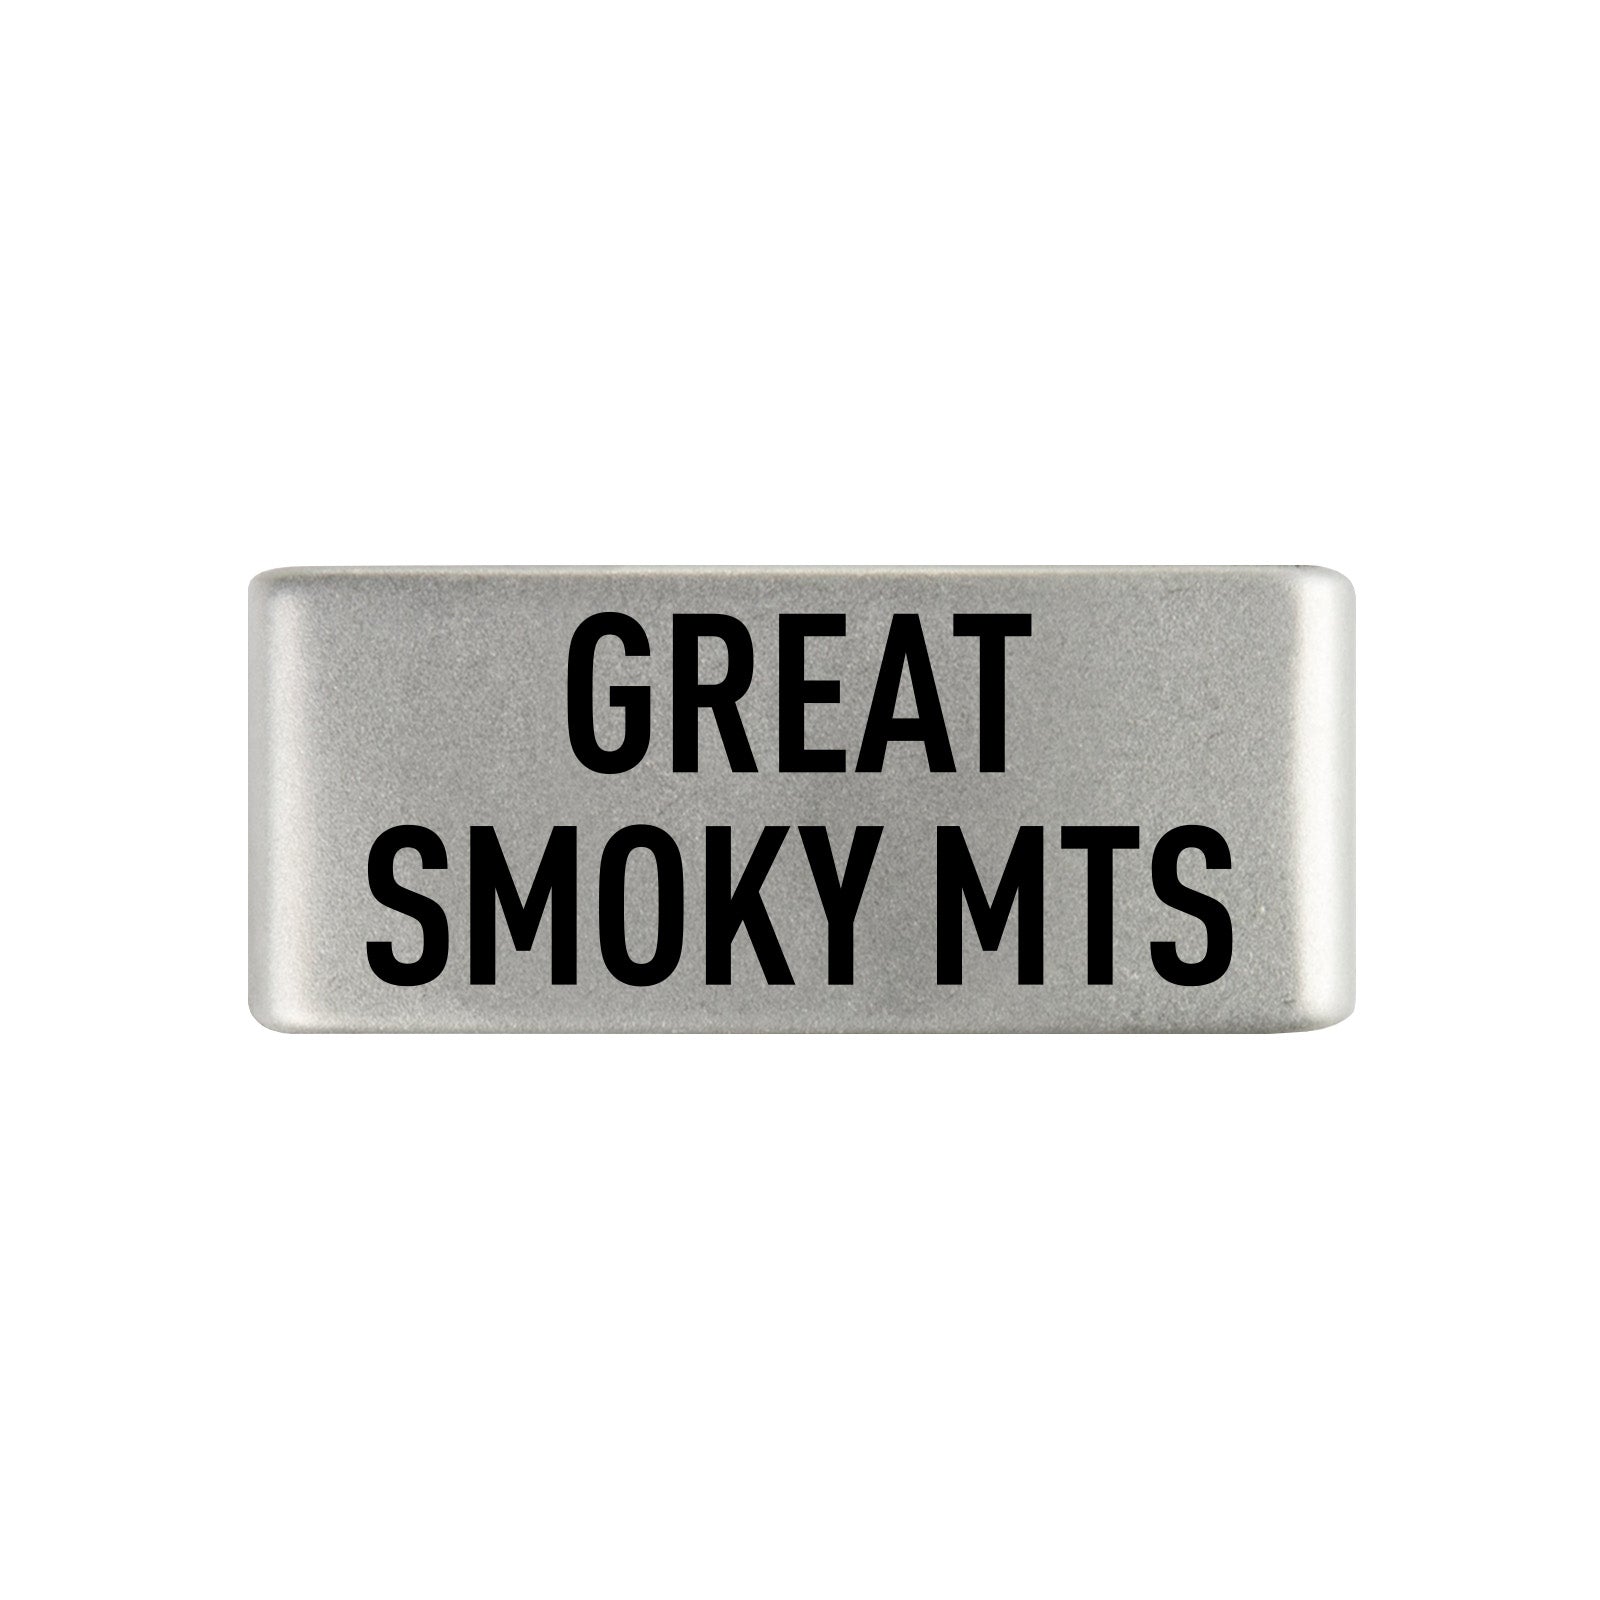 Great Smoky Mountains Badge Badge 13mm - ROAD iD